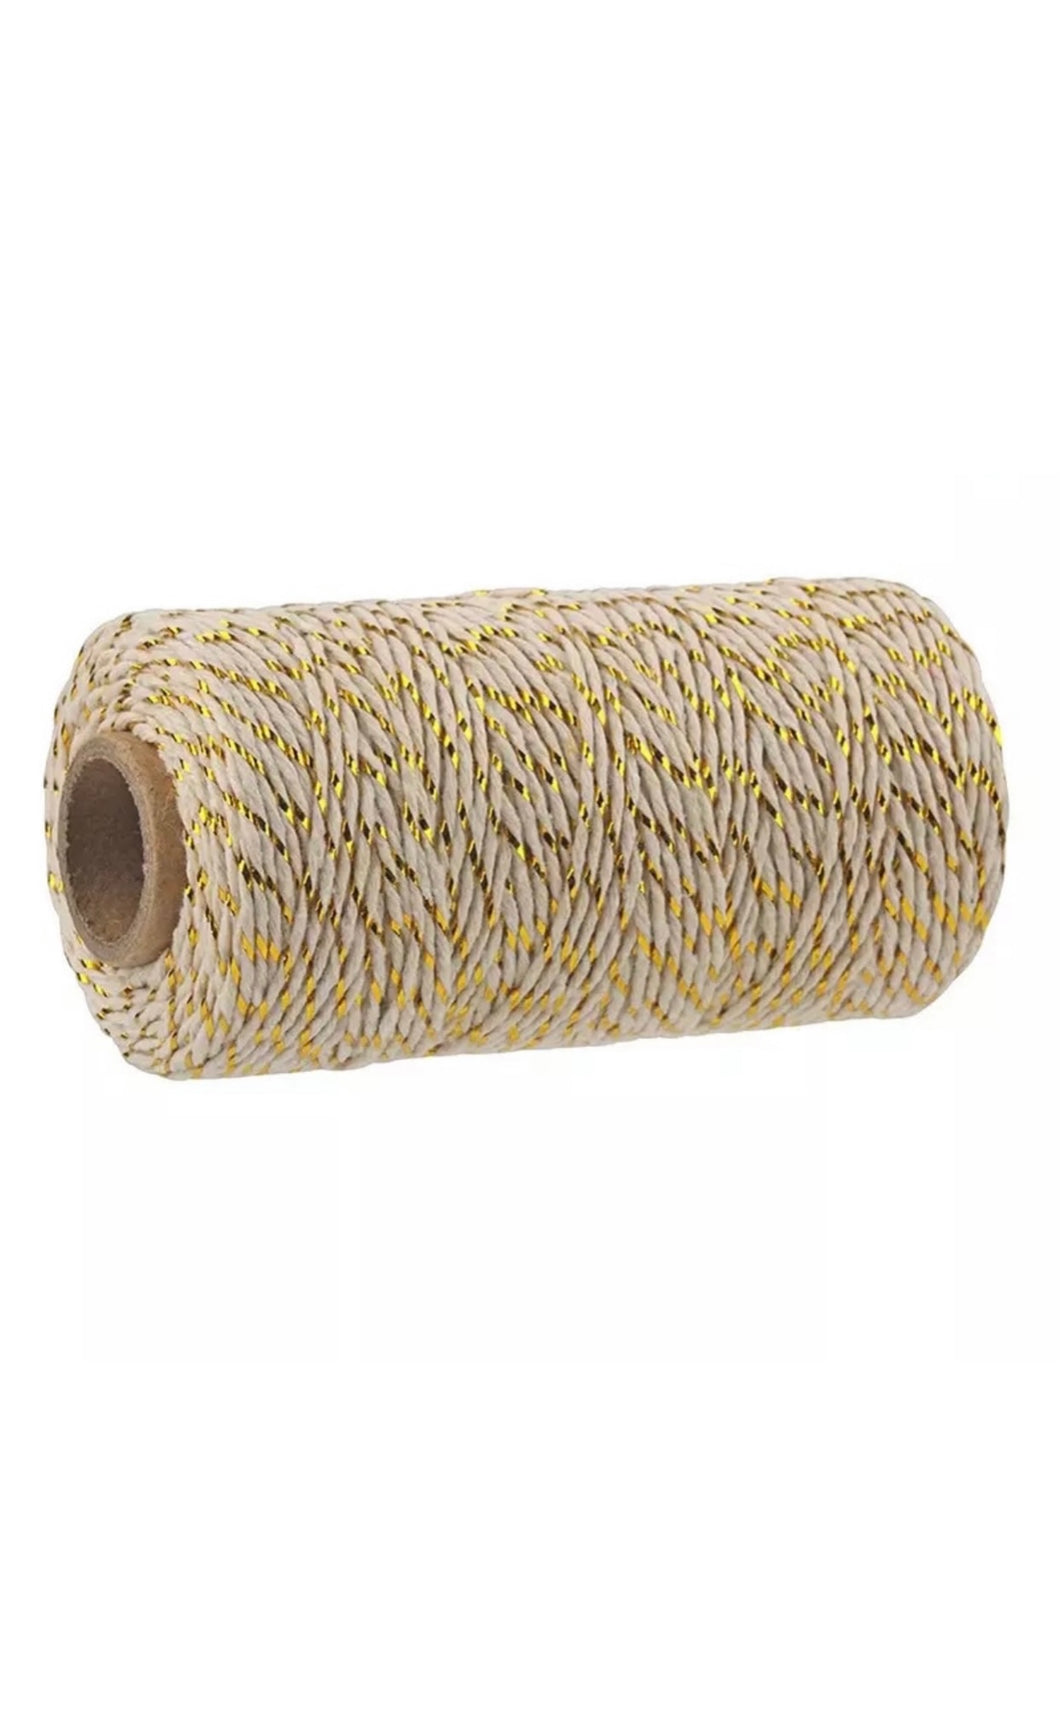 Bakers Twine 100m - Gold/Beige